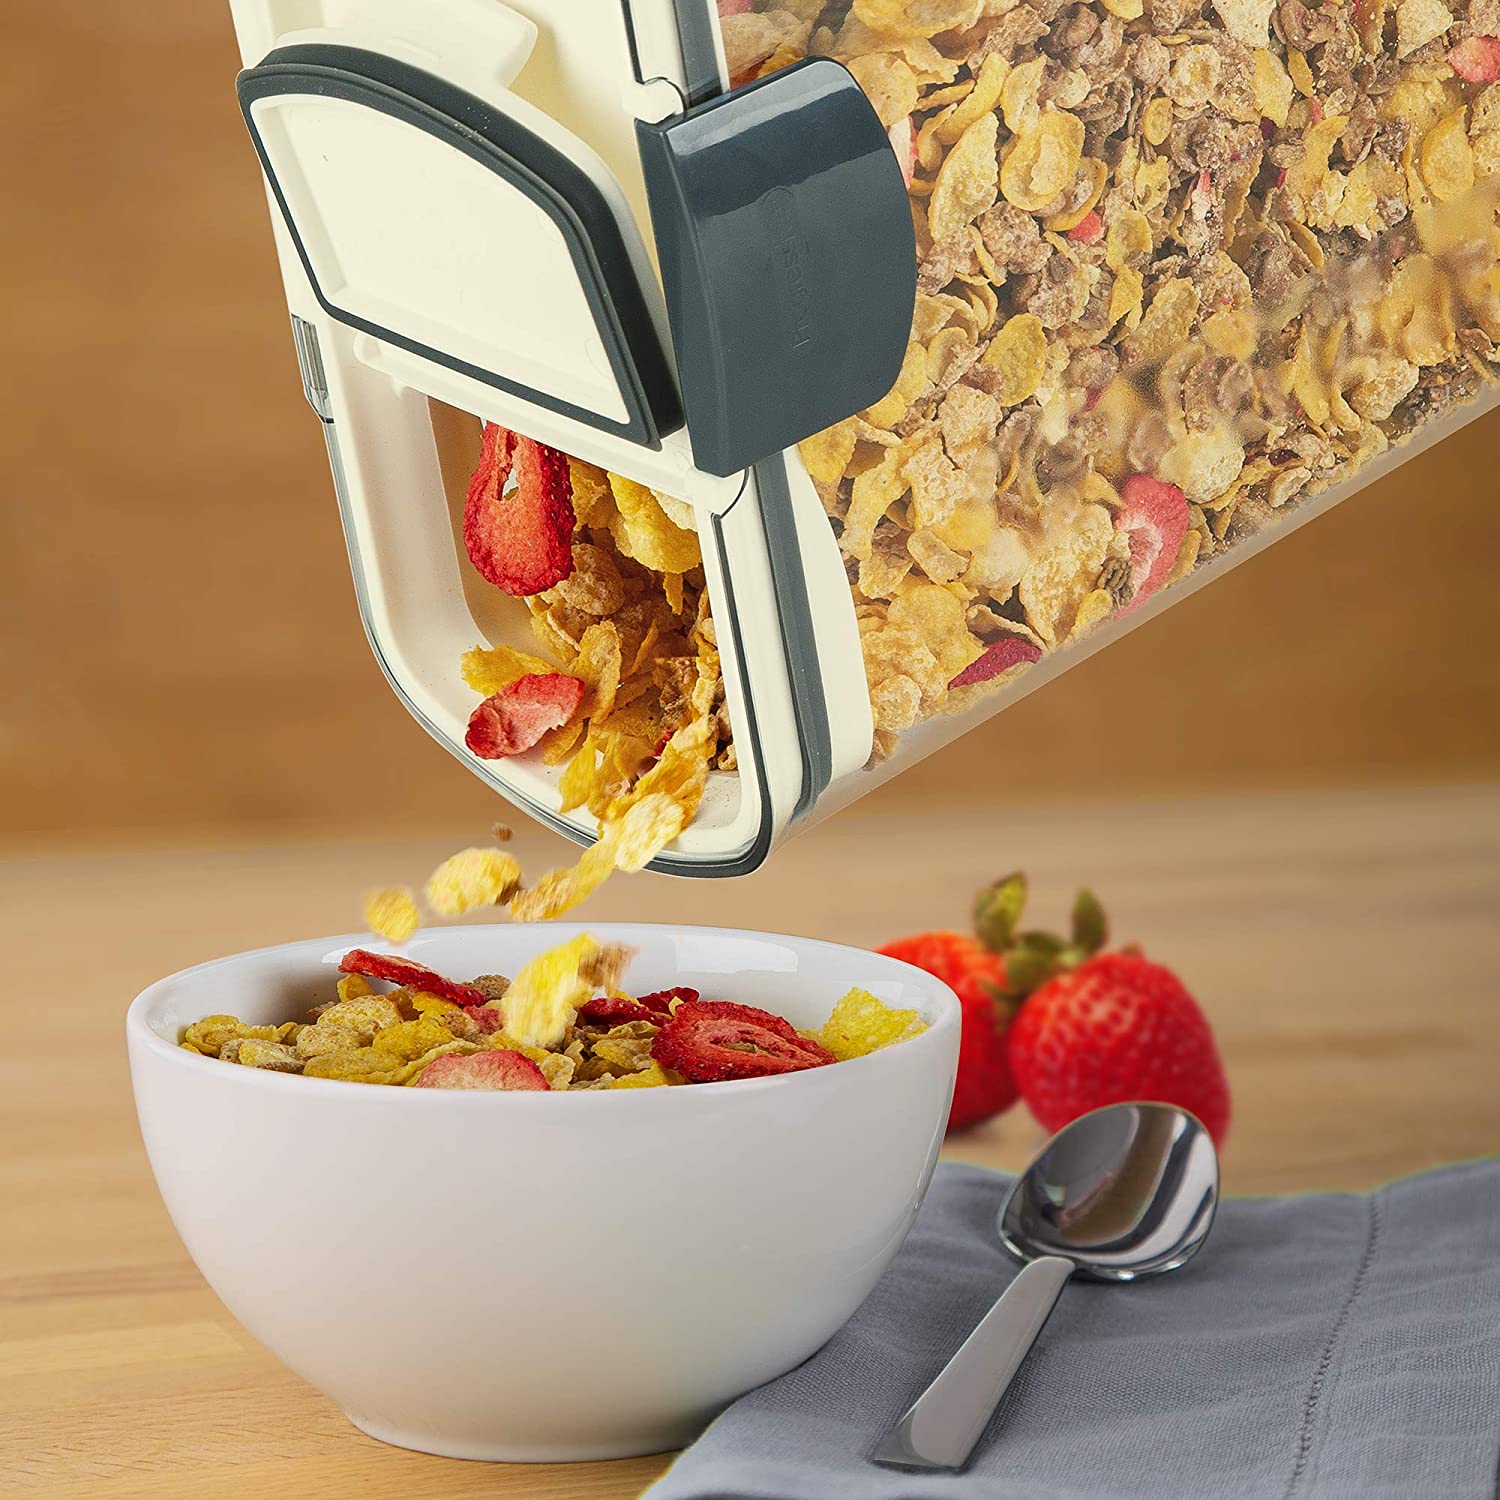 We Tried and Loved These 10 Dry Food Storage Containers